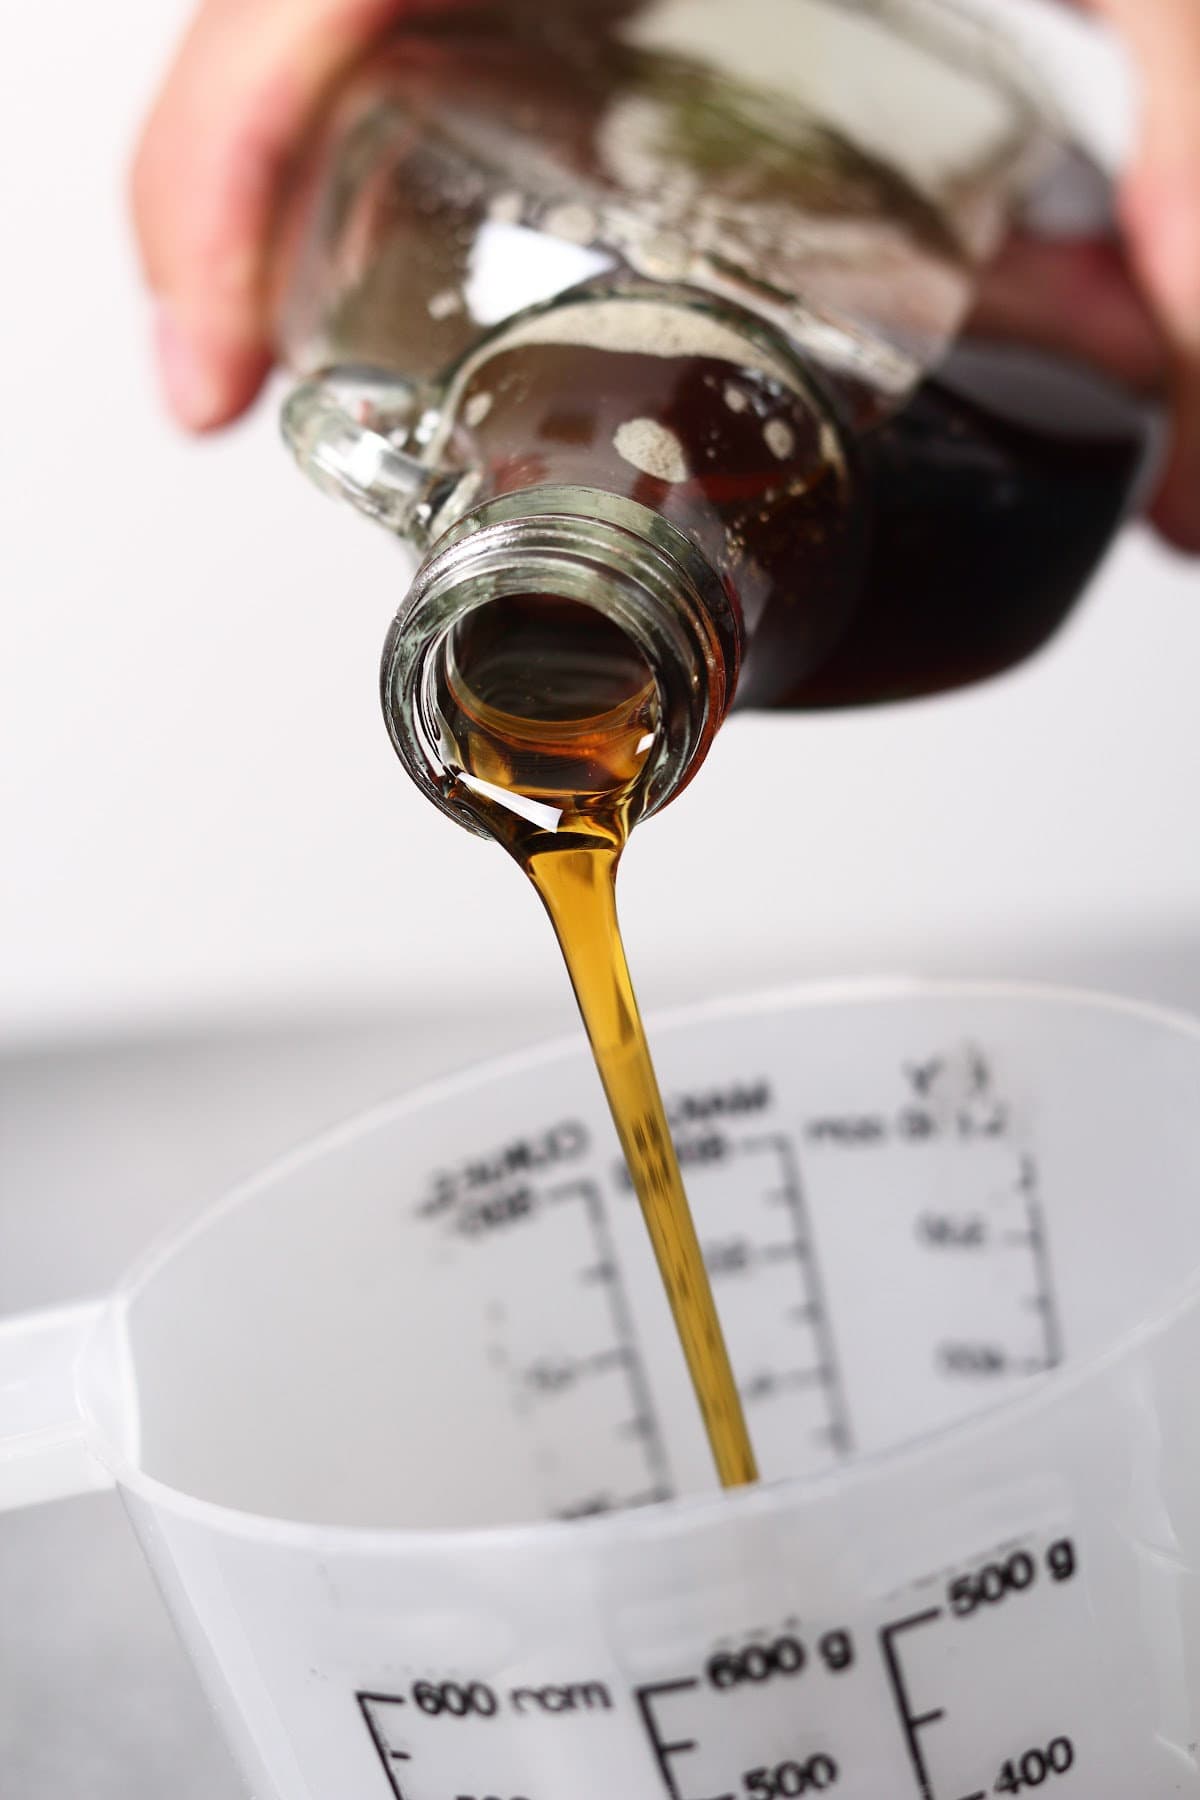 Pouring syrup into a measuring cup.